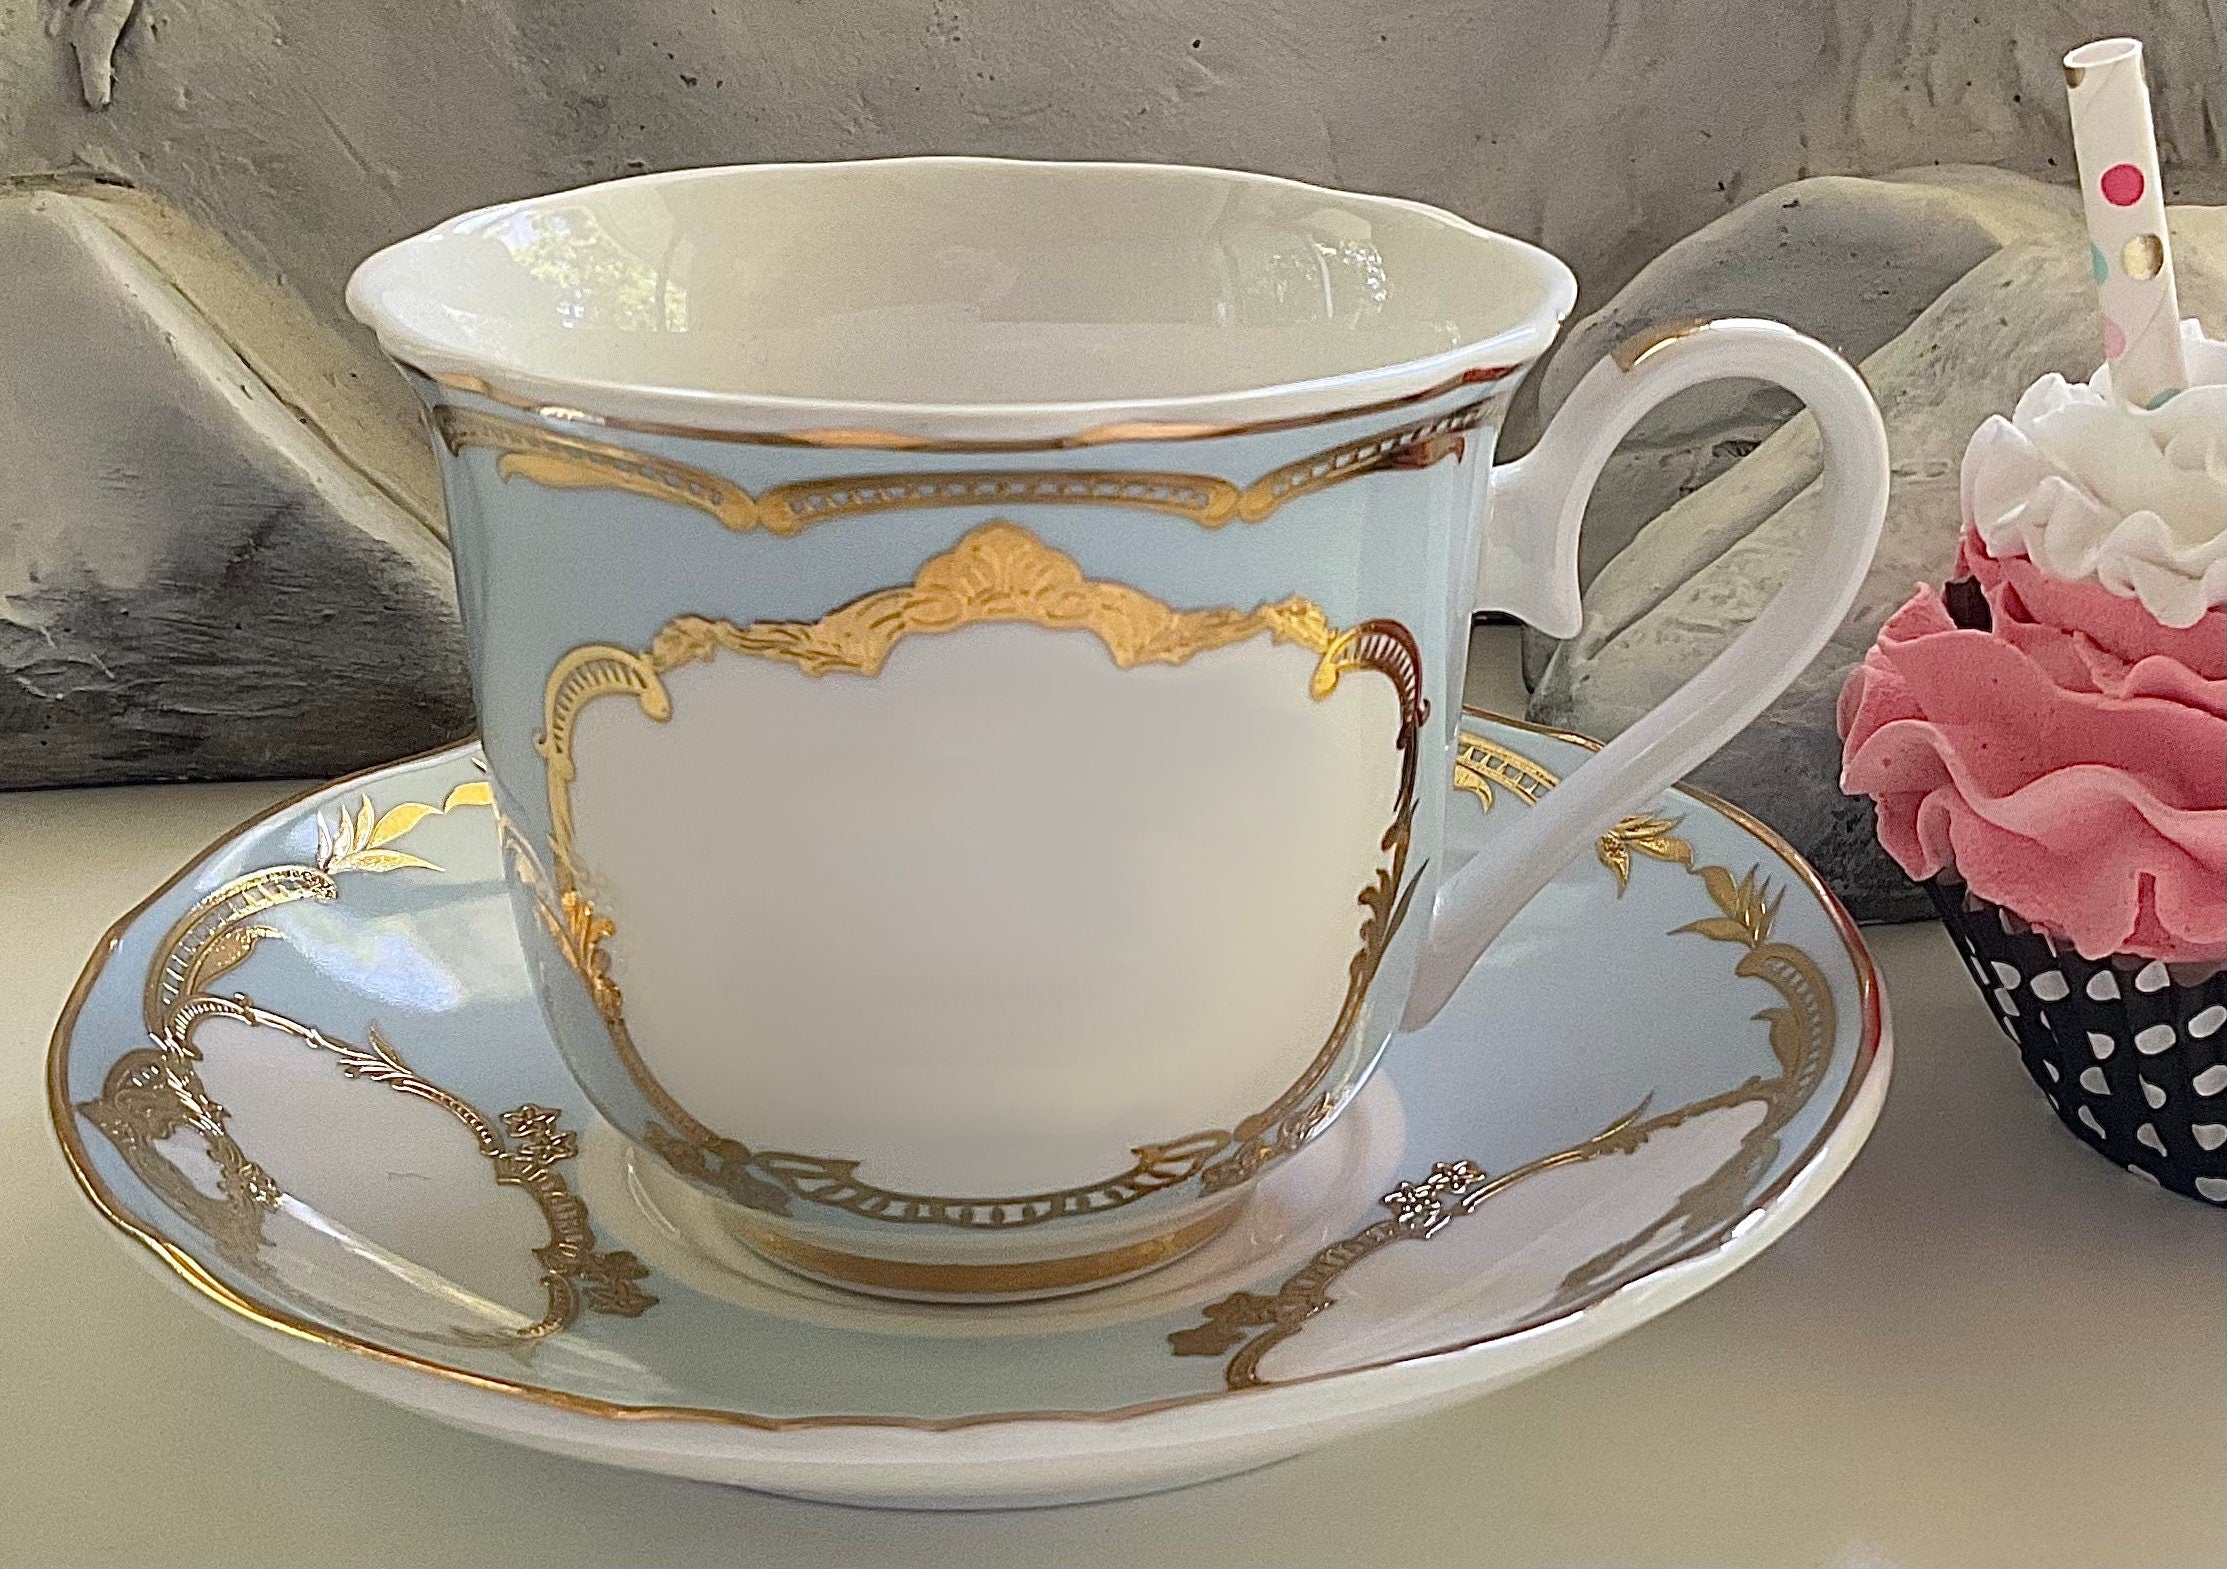 Custom Tea Cups and Saucers, Design Your Own Cup